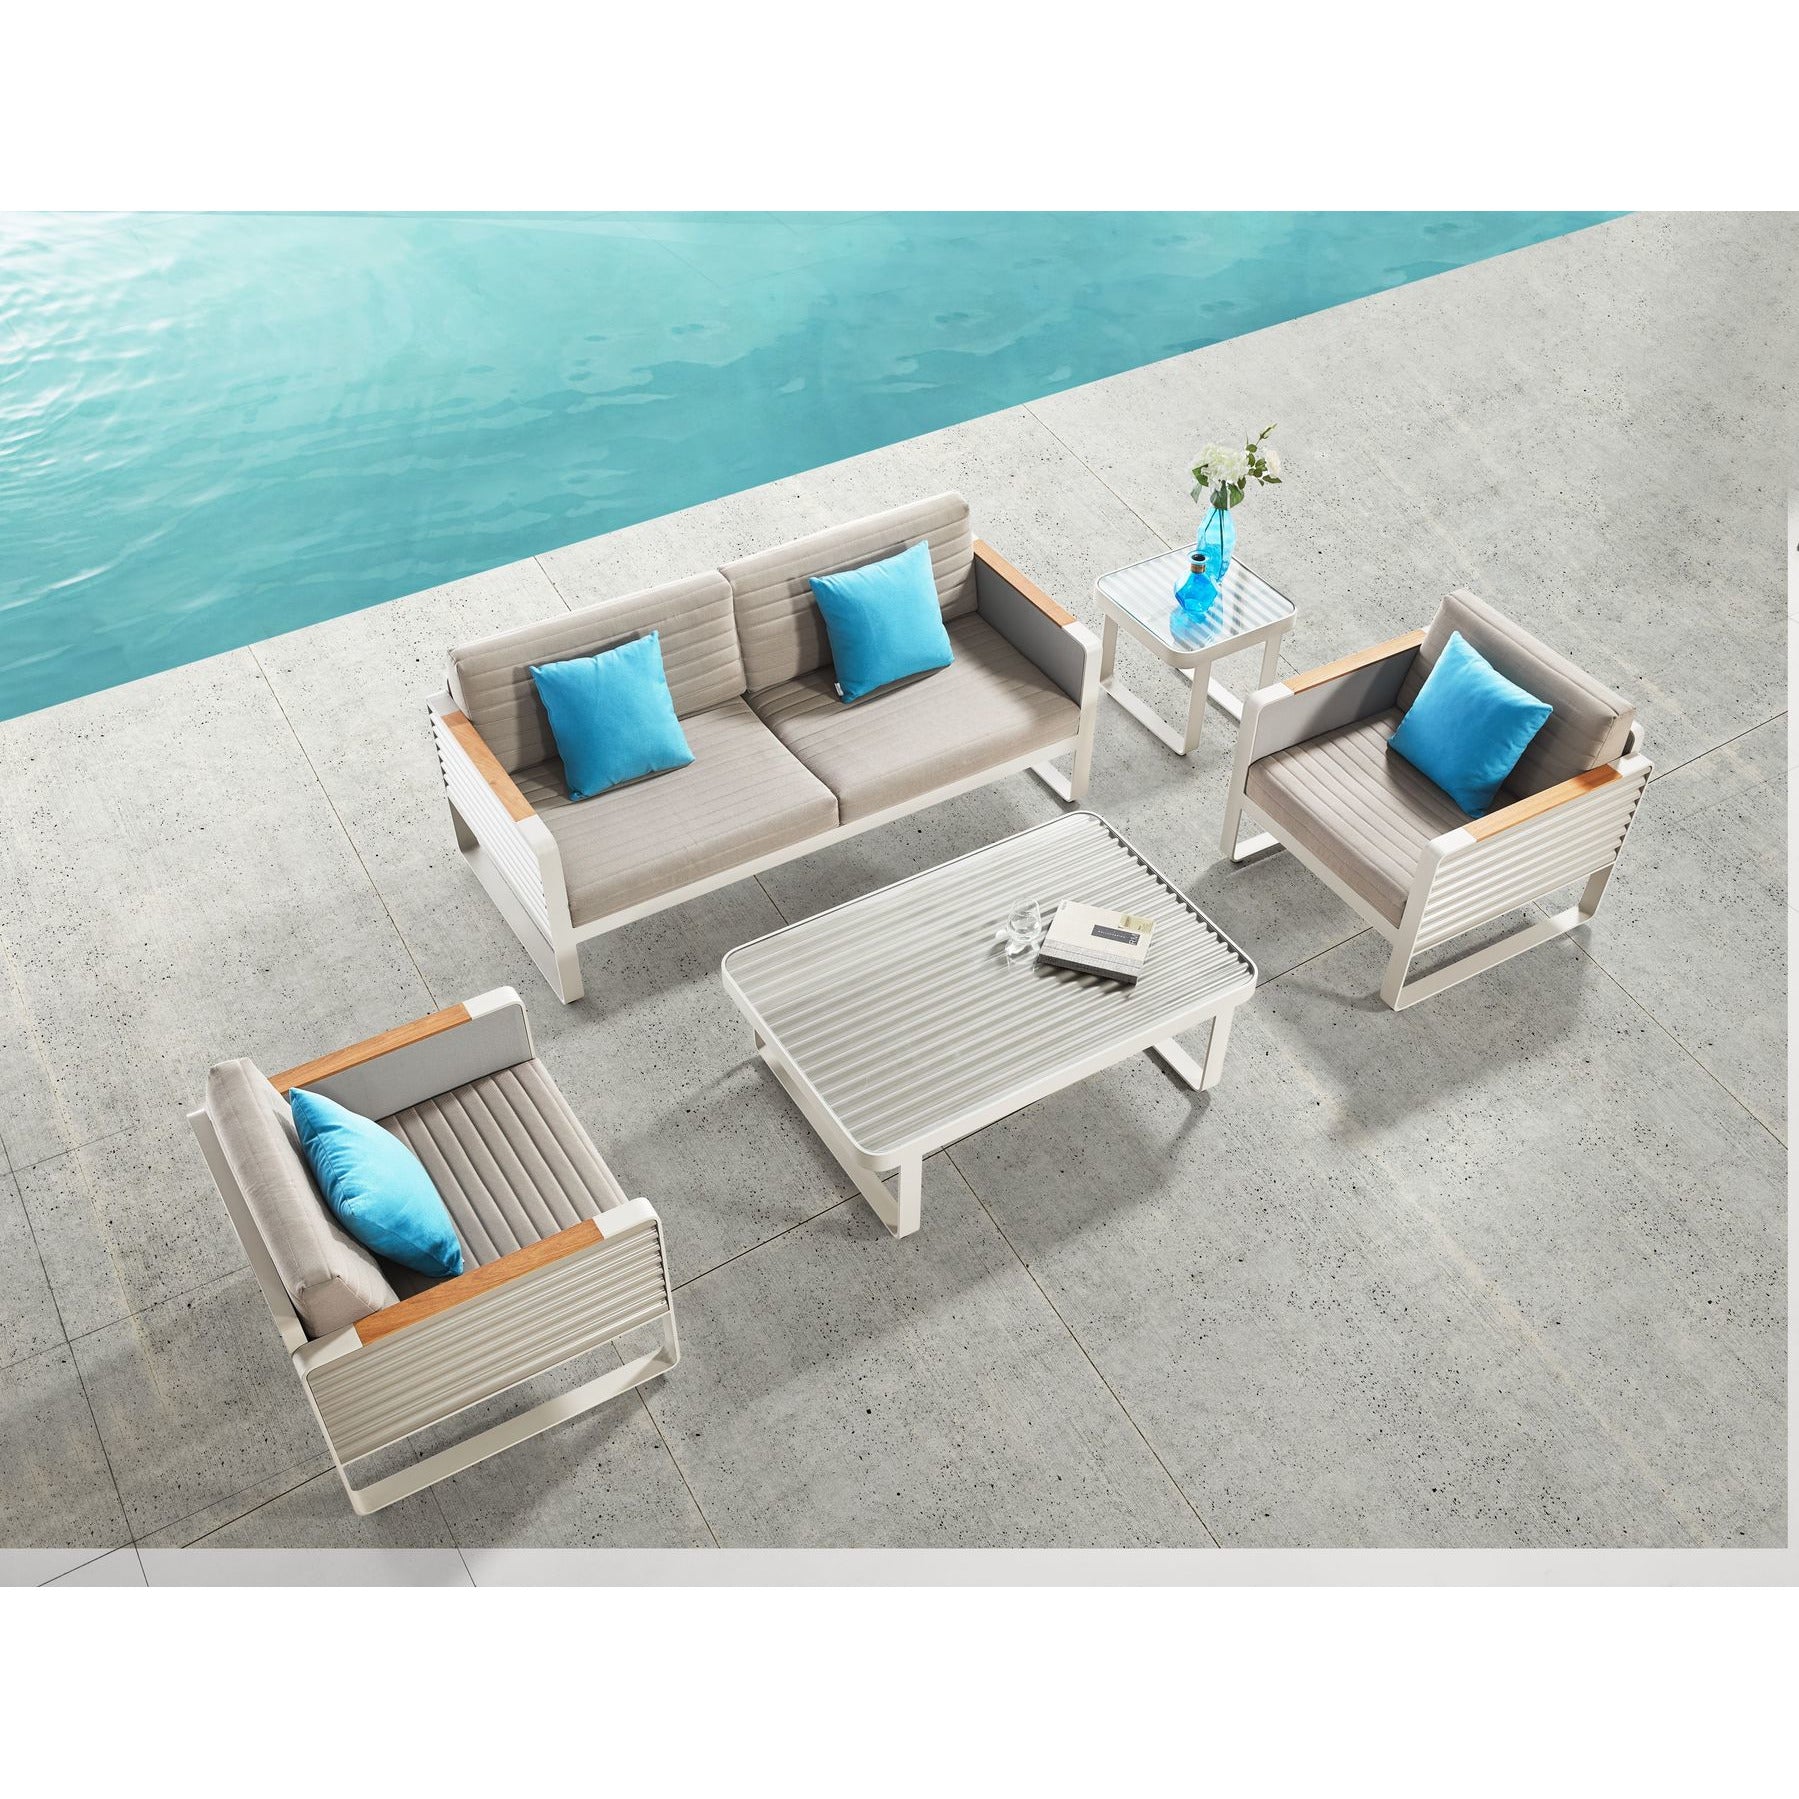 Airport 2 Seat Sofa, Coffee & Side Table Set - PadioLiving - Airport 2 Seat Sofa, Coffee & Side Table Set - Outdoor Sofa and Coffee Table Set - PadioLiving